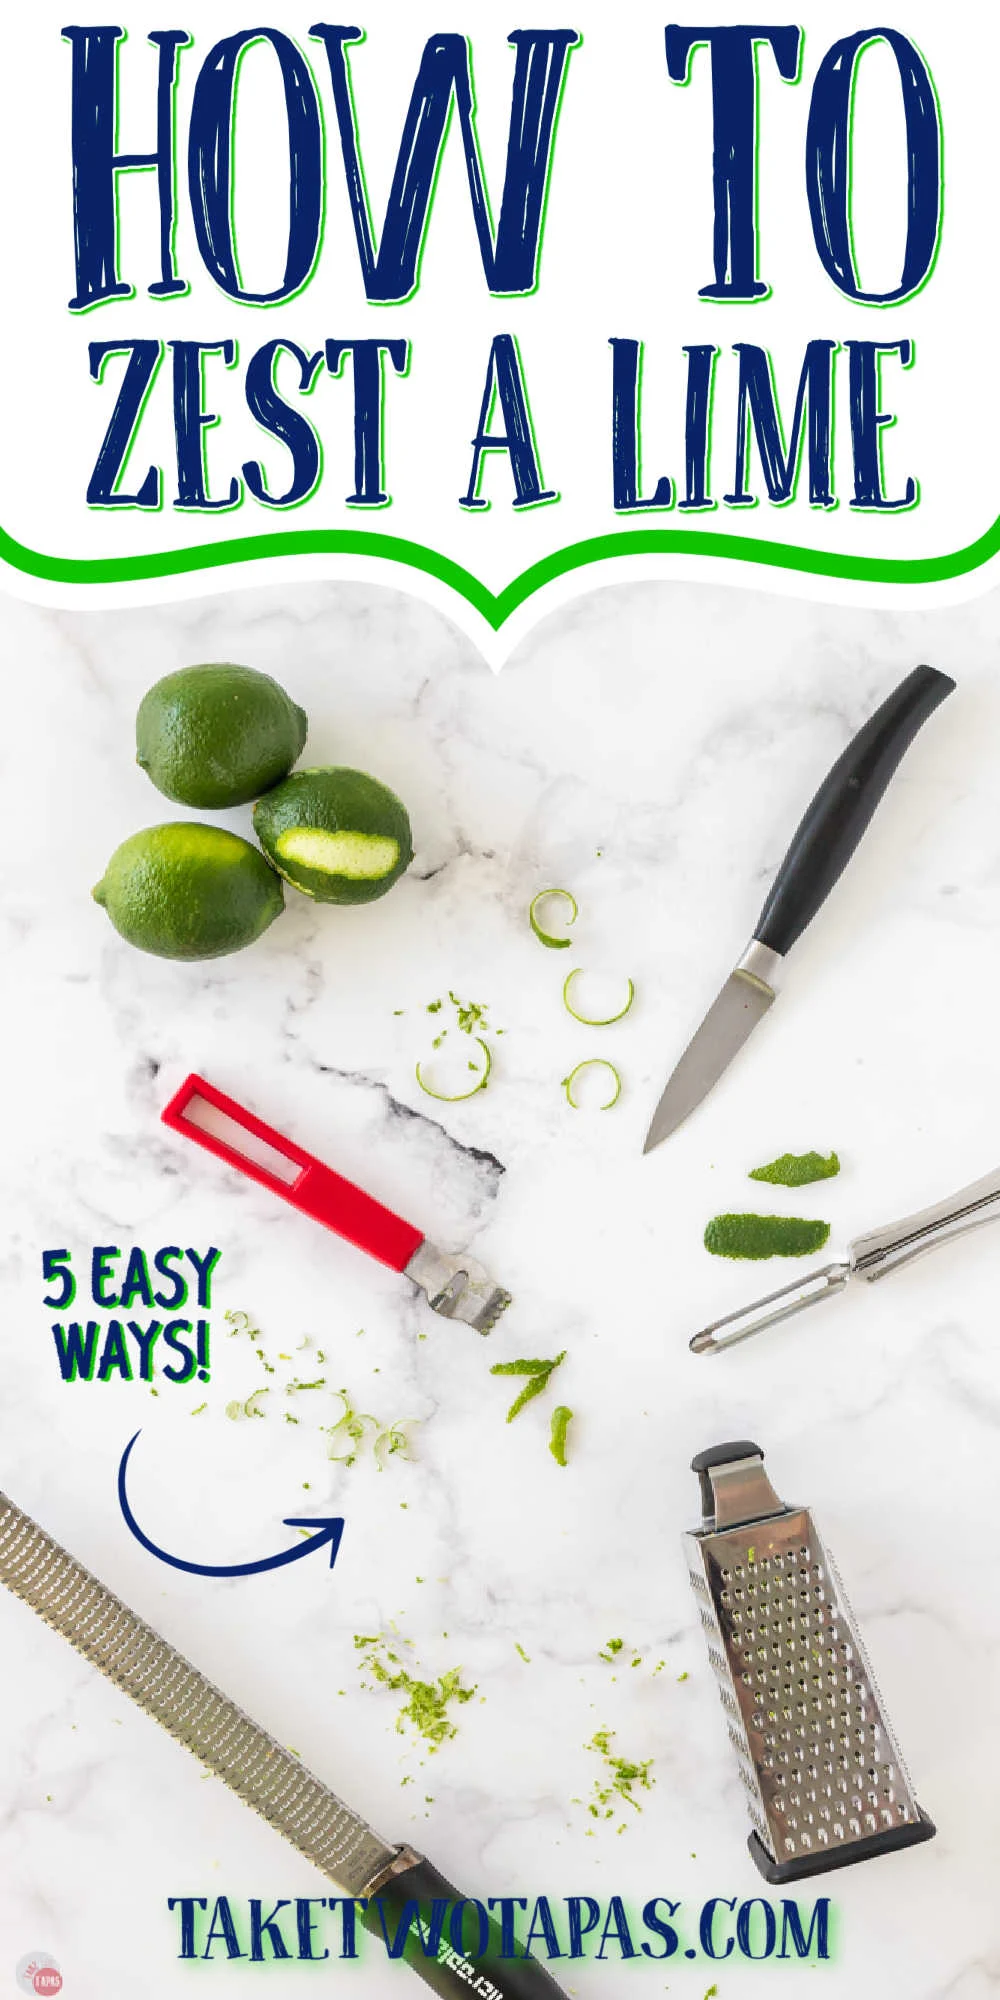 limes and tools with text "how to zest a lime"